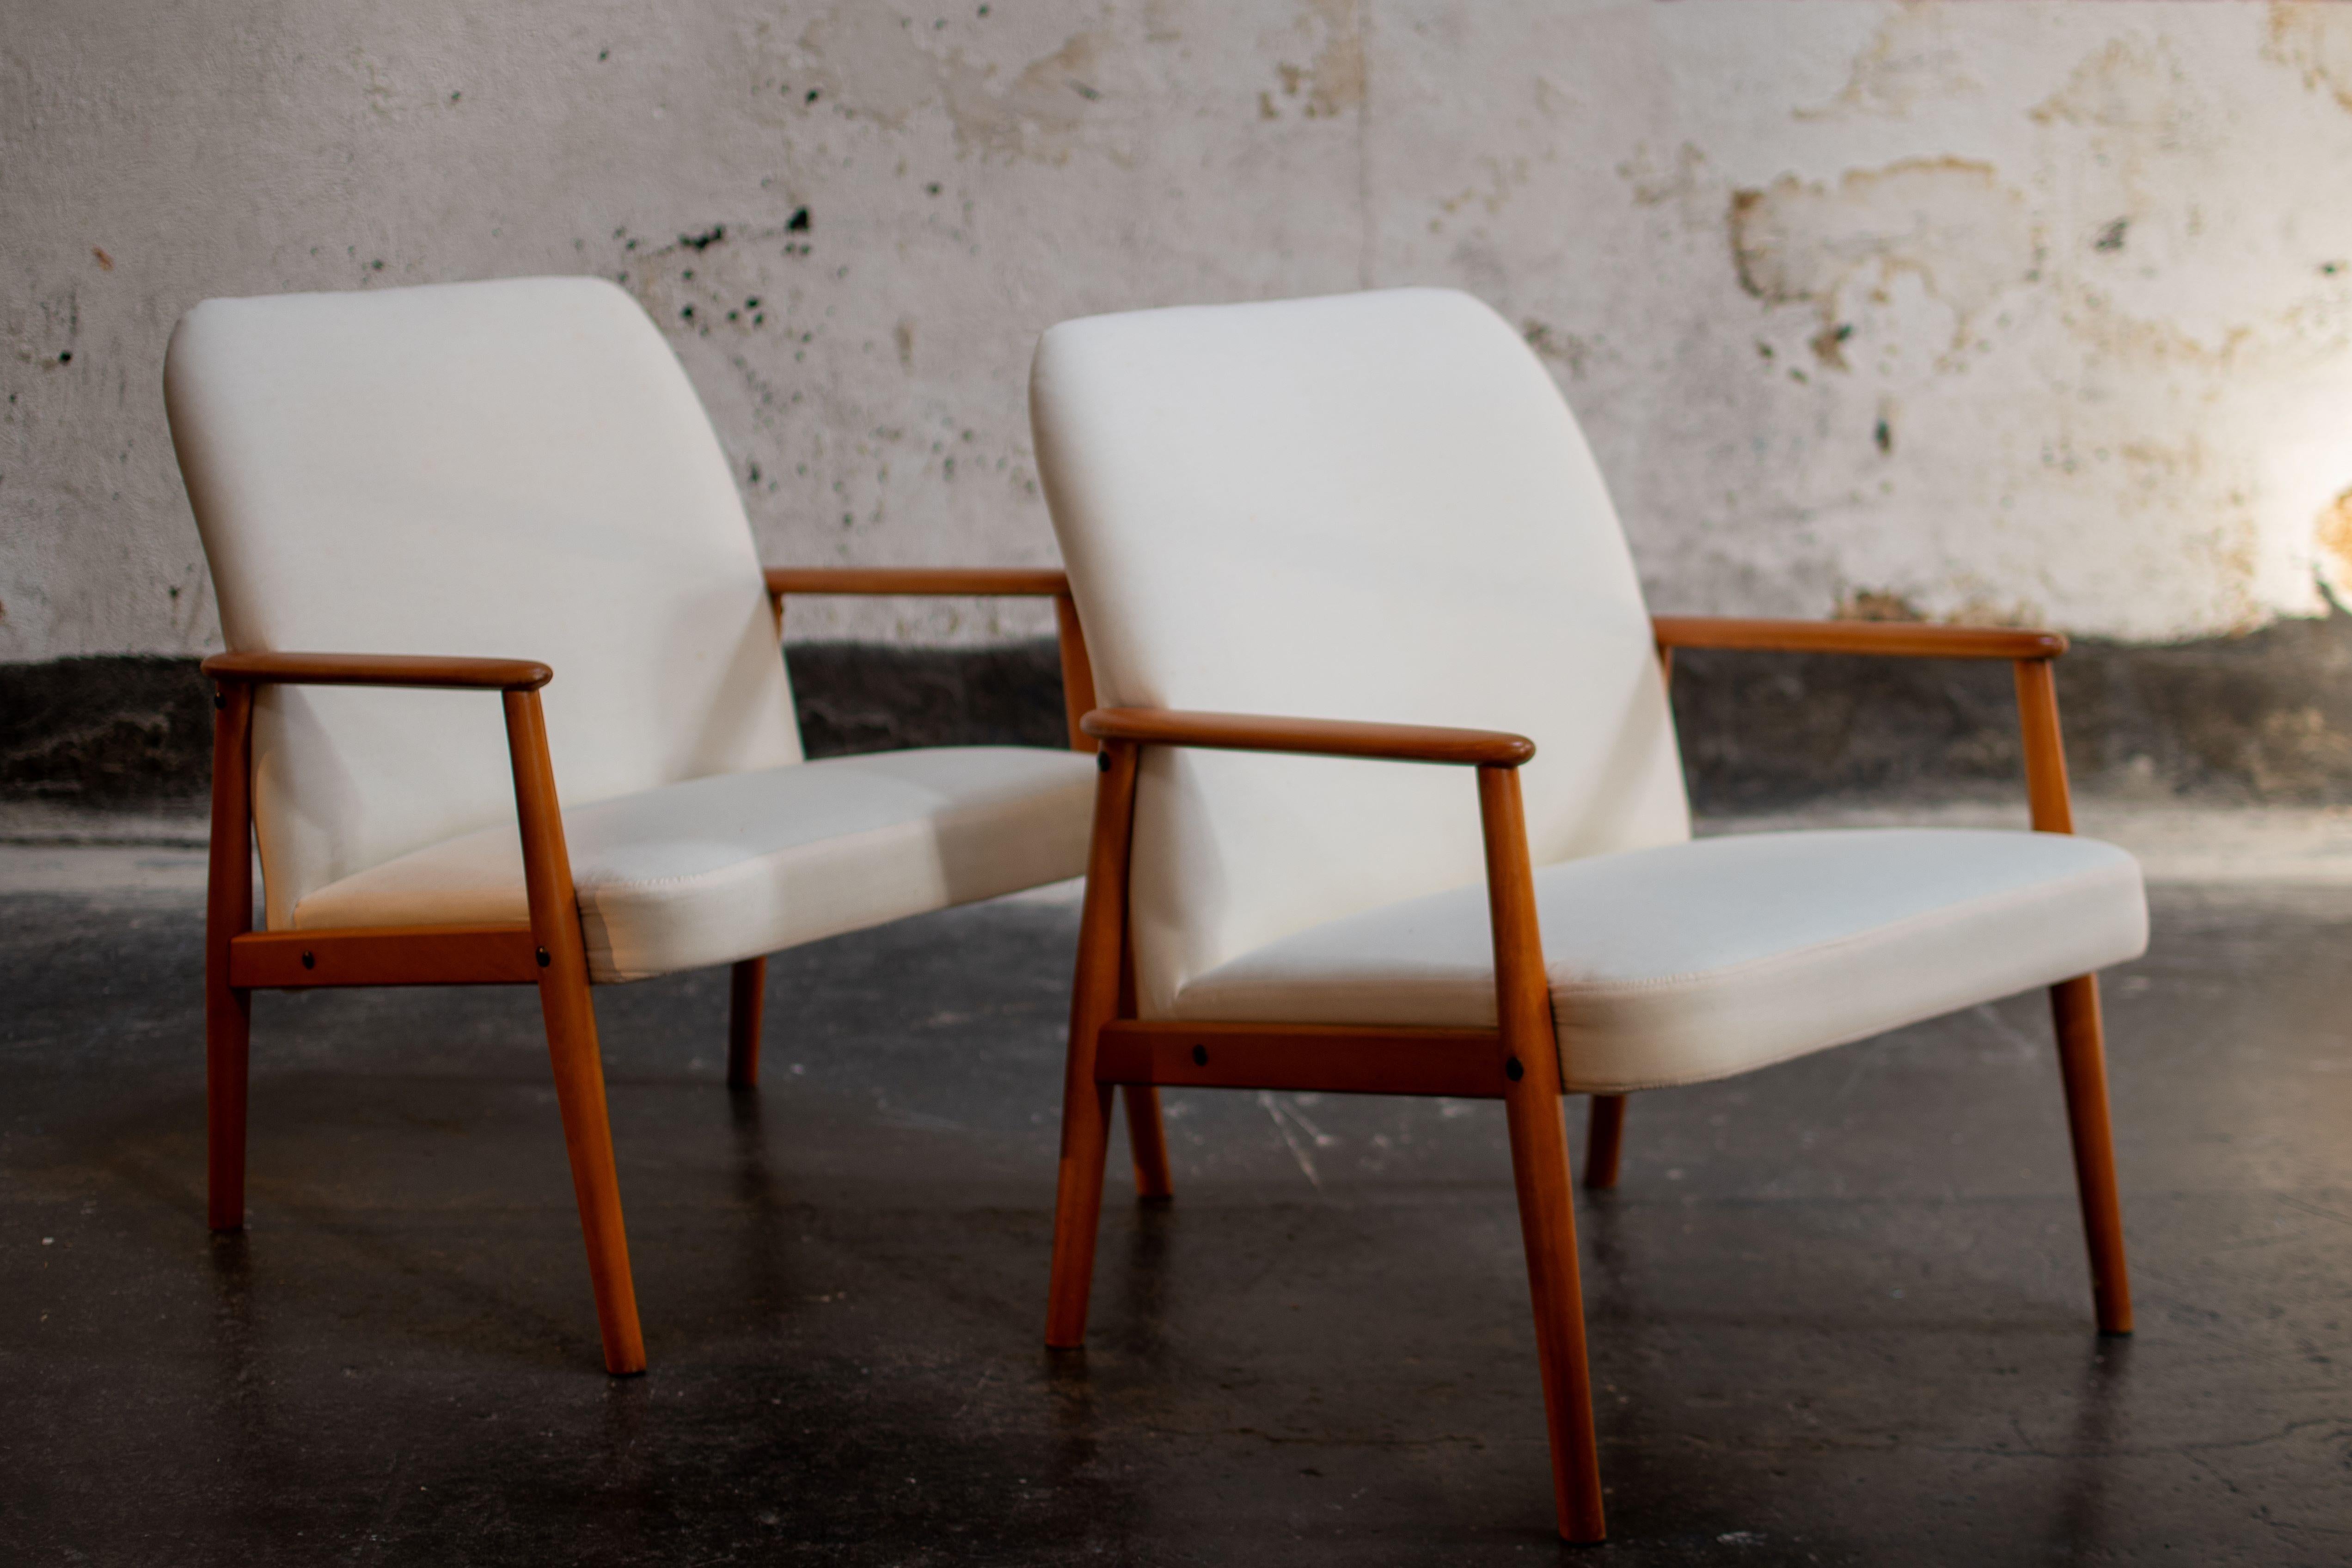 Pair of Swedish Scandinavian Modern lounge chairs - newly restored and reupholstered. Clean lines, warm wood,  and tapered legs embody the image of Scandinavian modern style. Scandinavian interiors often have very low ceilings to contain heat,